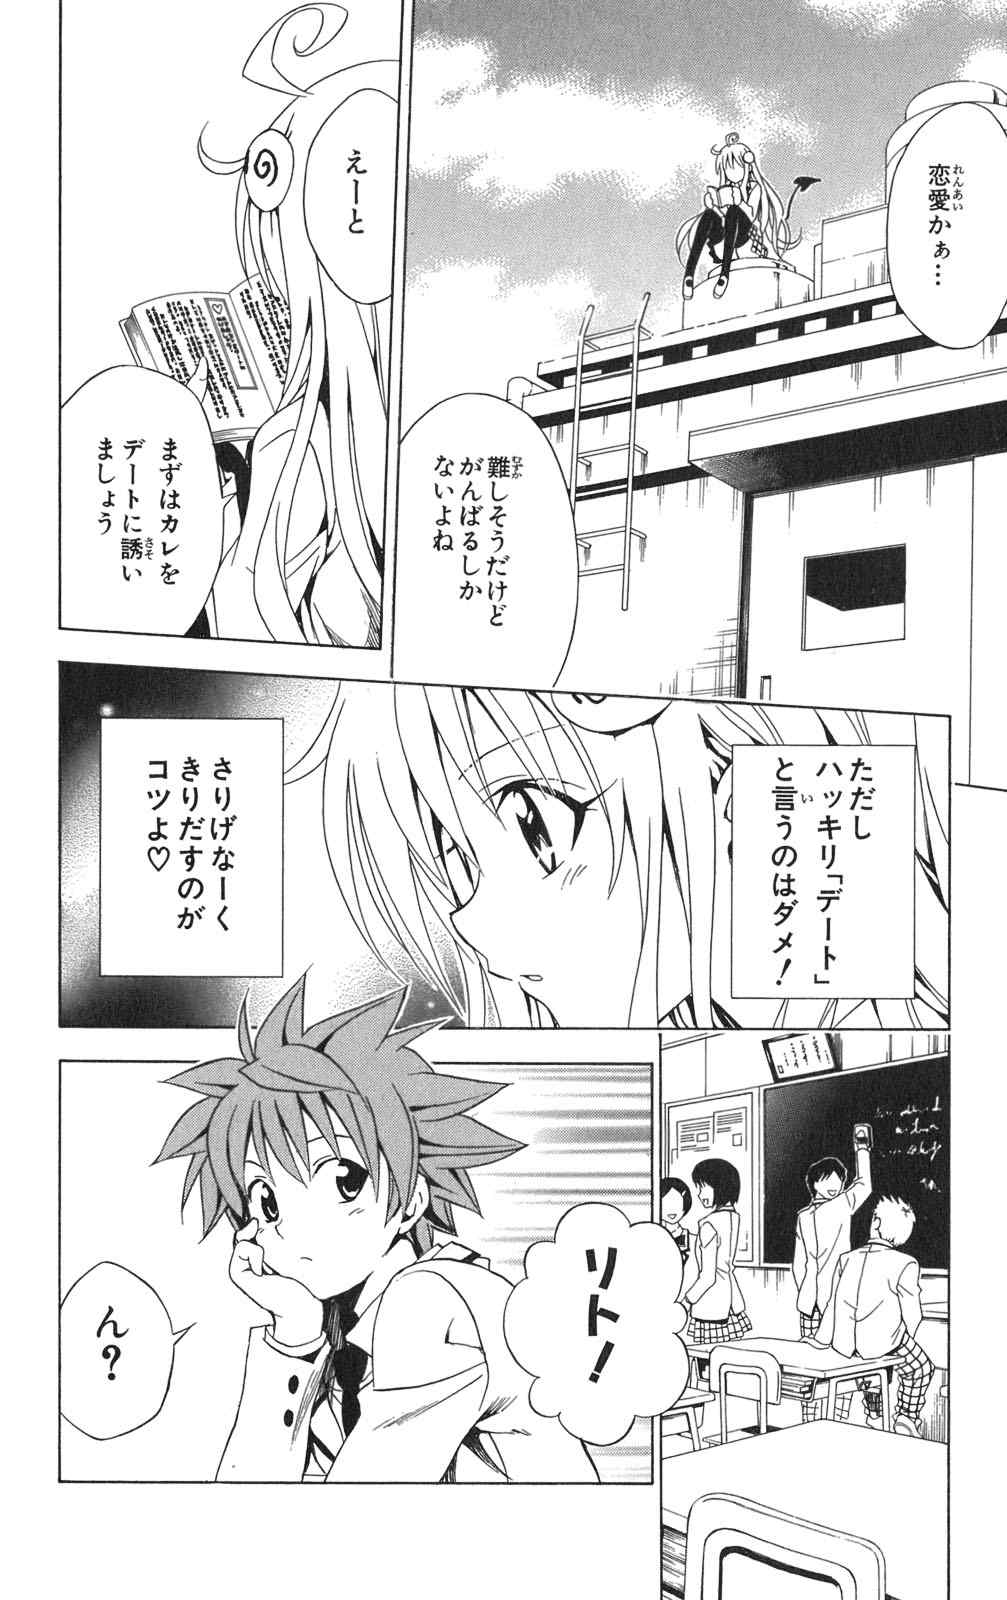 《To LOVEるとらぶる》漫画 To LOVE 10卷